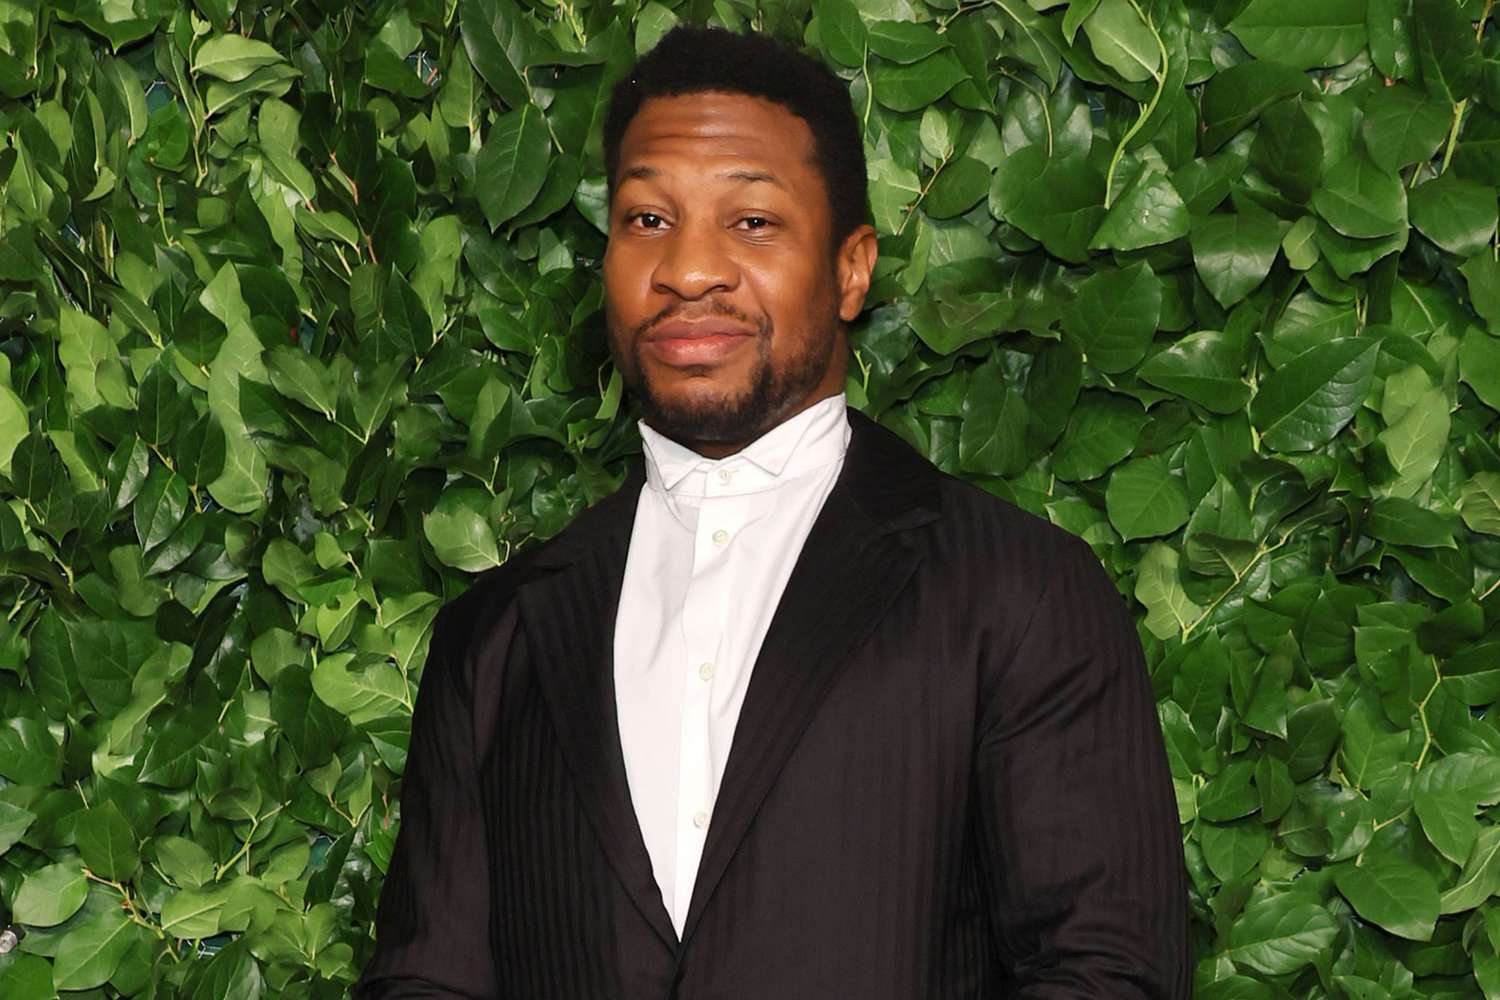 Jonathan Majors attends The 2022 Gotham Awards at Cipriani Wall Street at Cipriani Wall Street on November 28, 2022 in New York City.